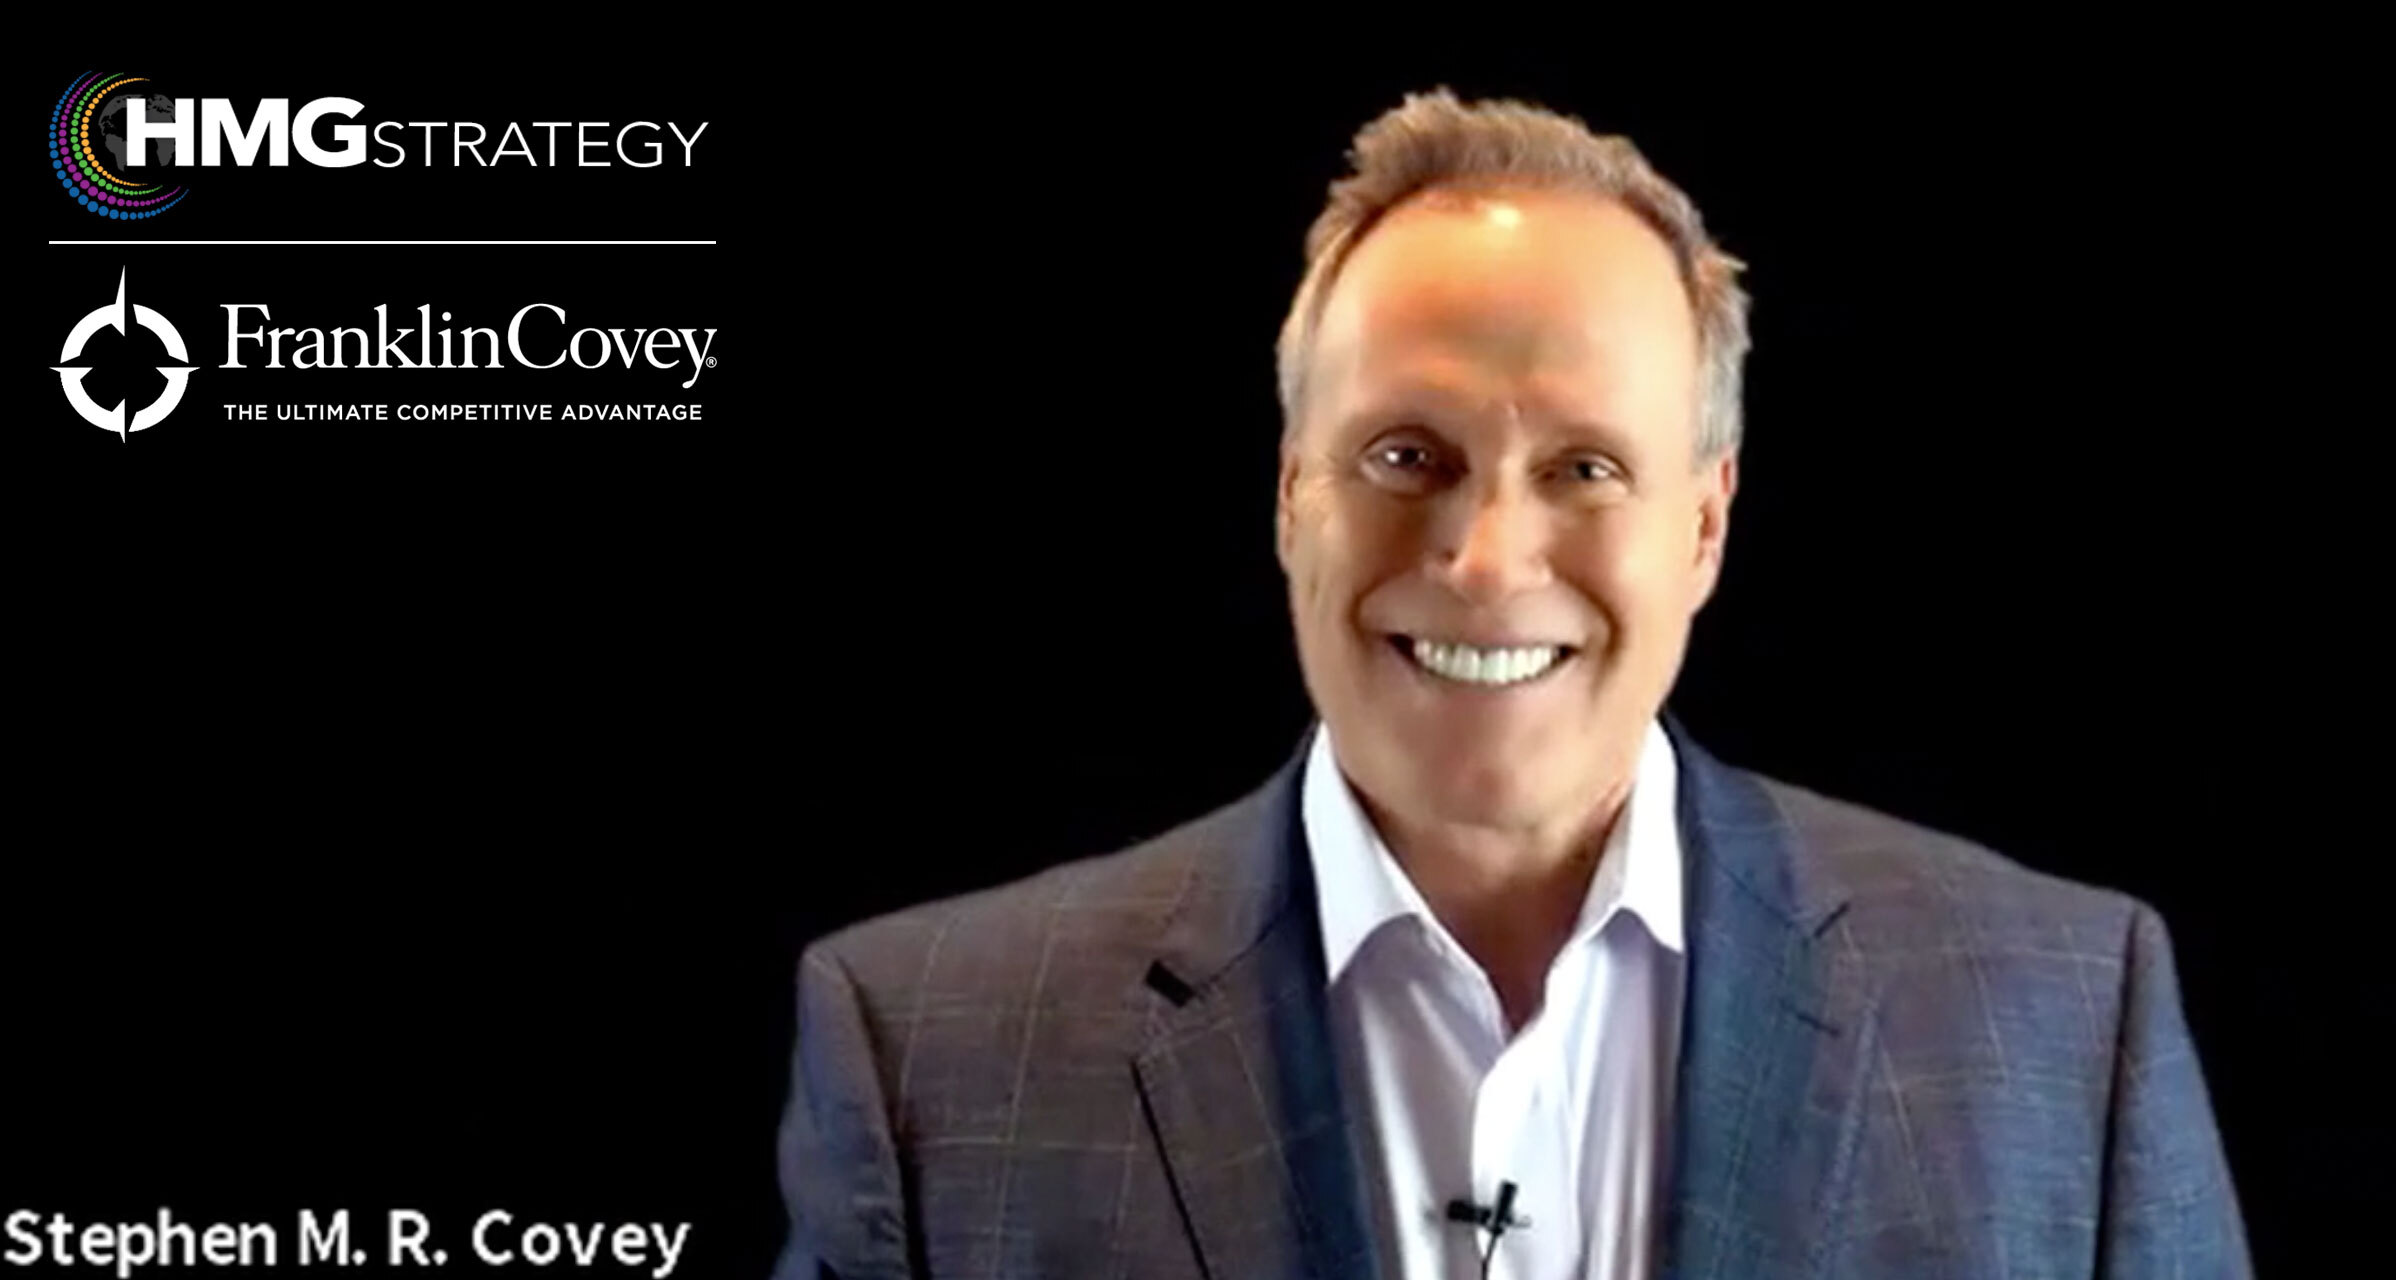 HMG Strategy Enters Unique Partnership with Bestselling Author Stephen M.R. Covey